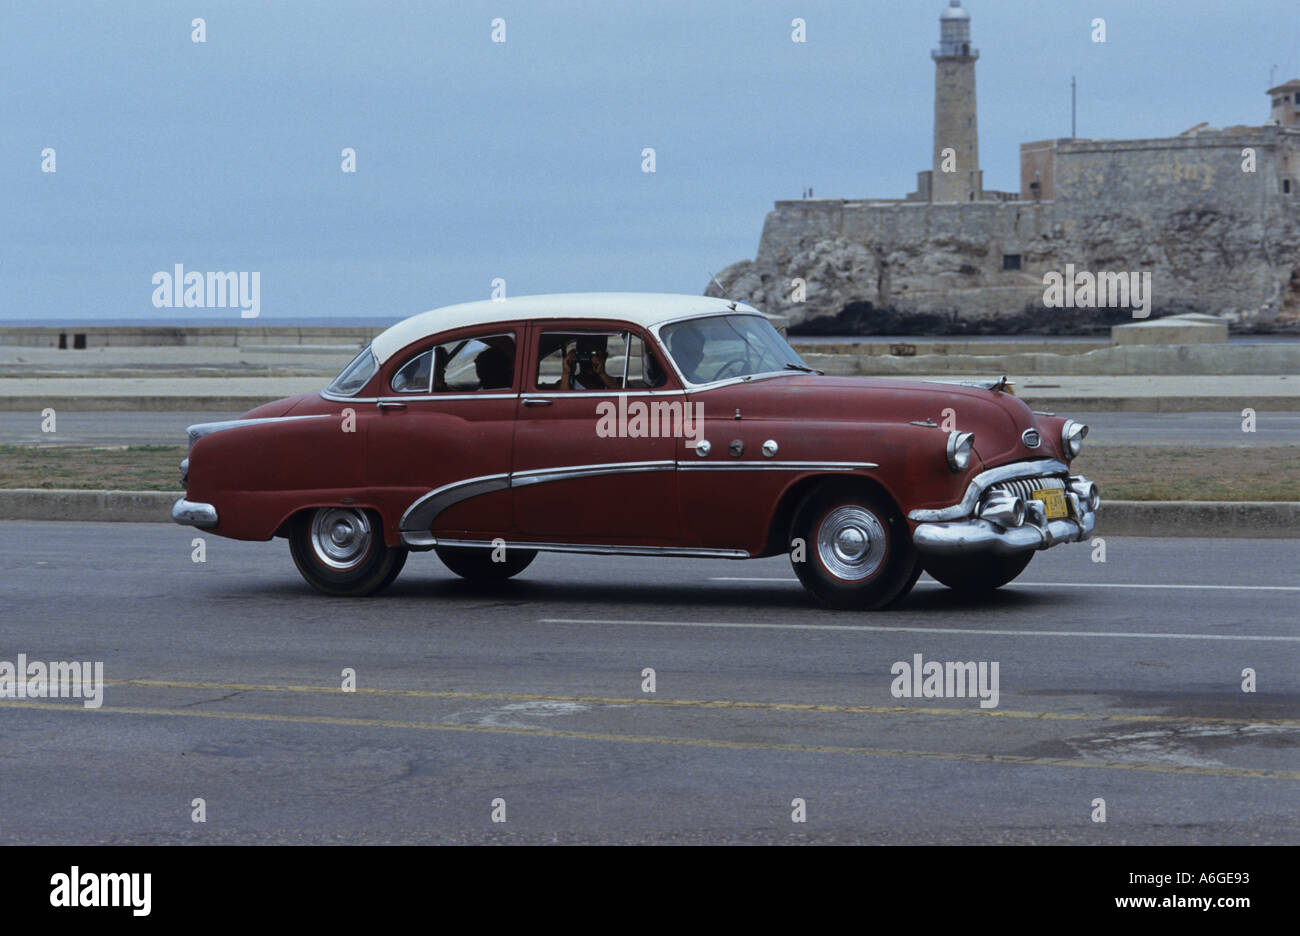 1950s American automobile car kept operational with second hand Japanese parts Havana Cuba Stock Photo